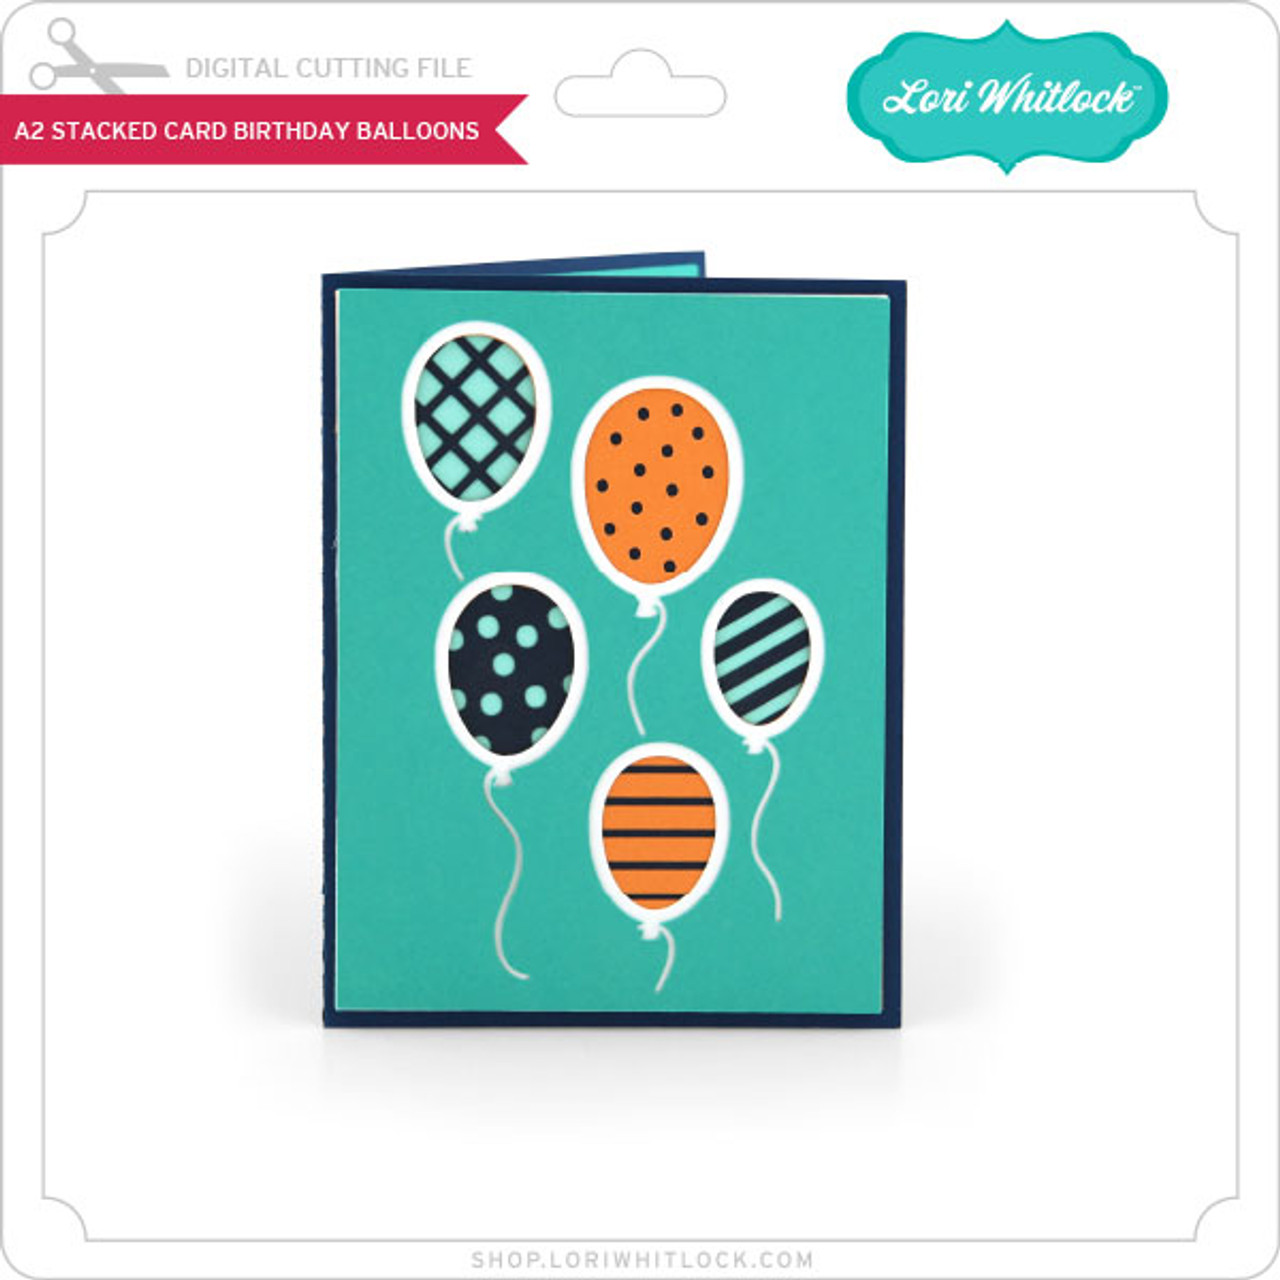 A2 Stacked Card Birthday Balloons - Lori Whitlock's SVG Shop